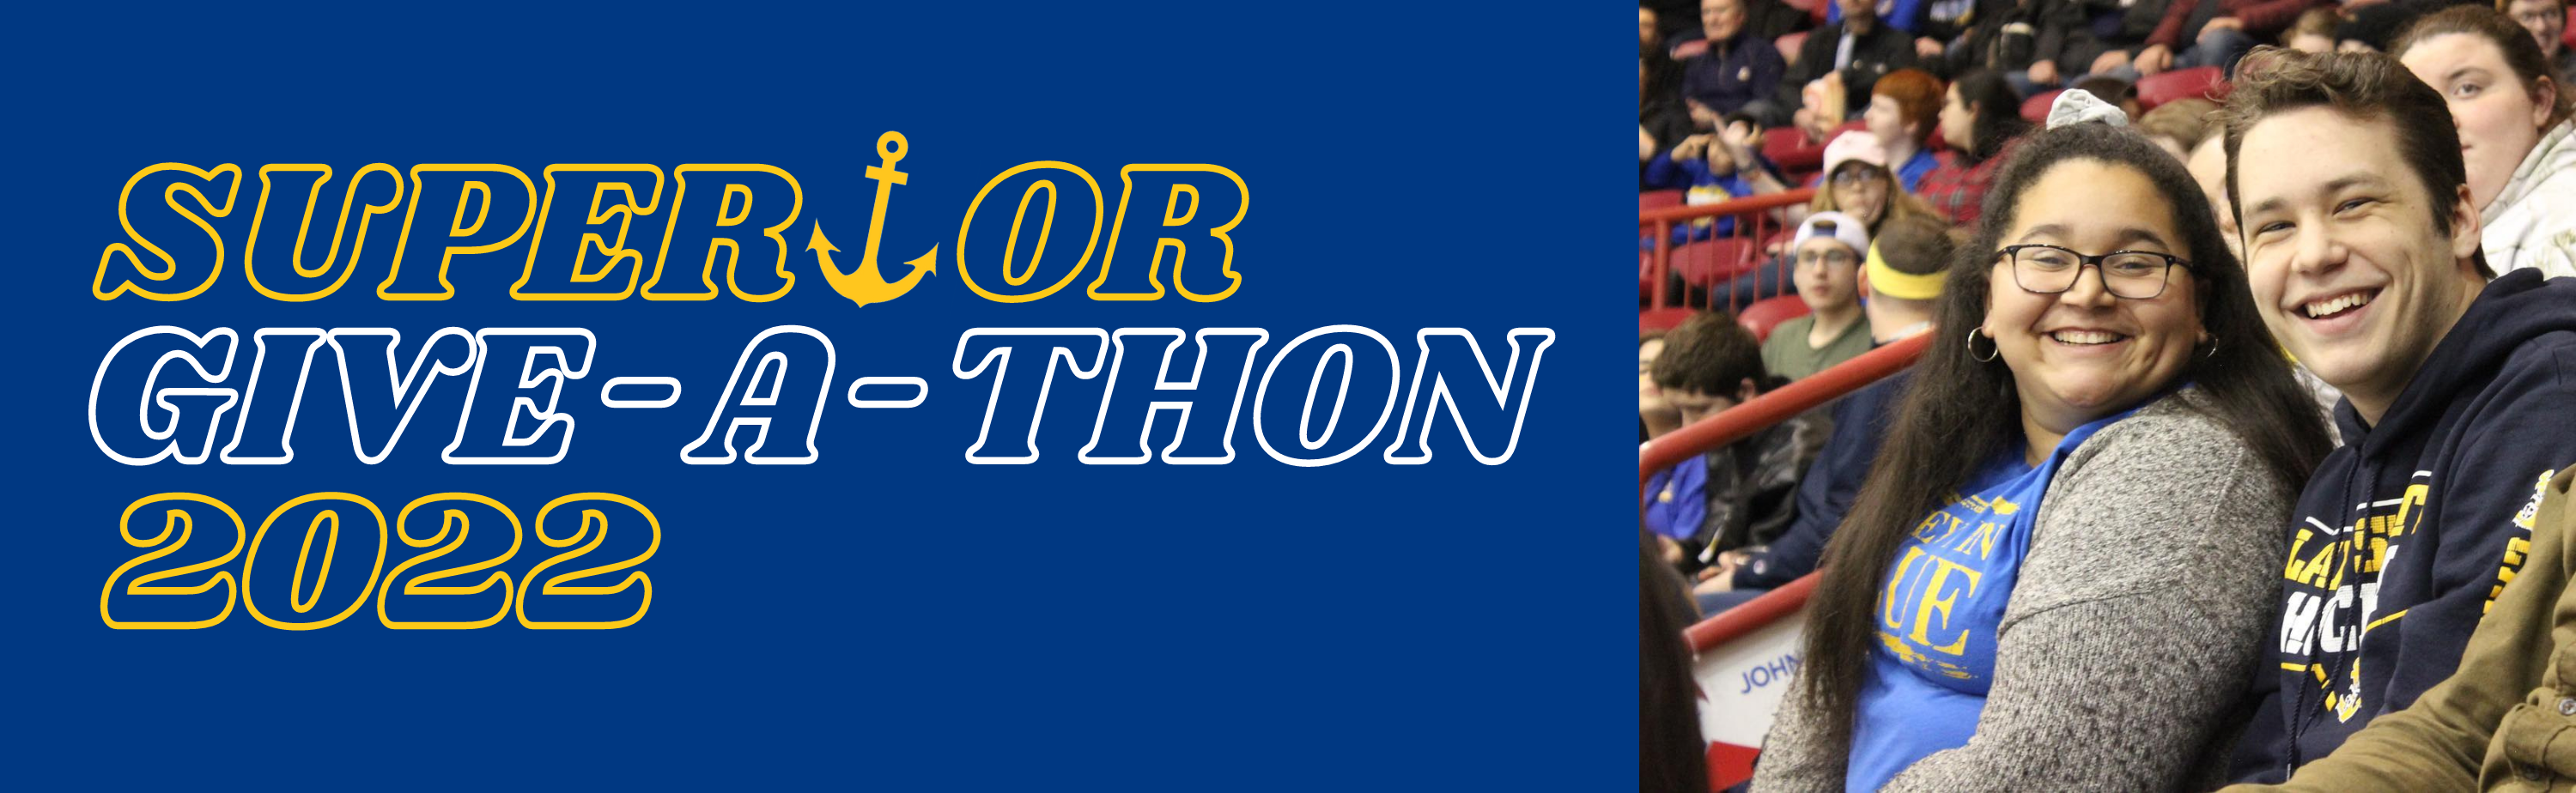 uperior Give-A-Thon - 2022 Banner